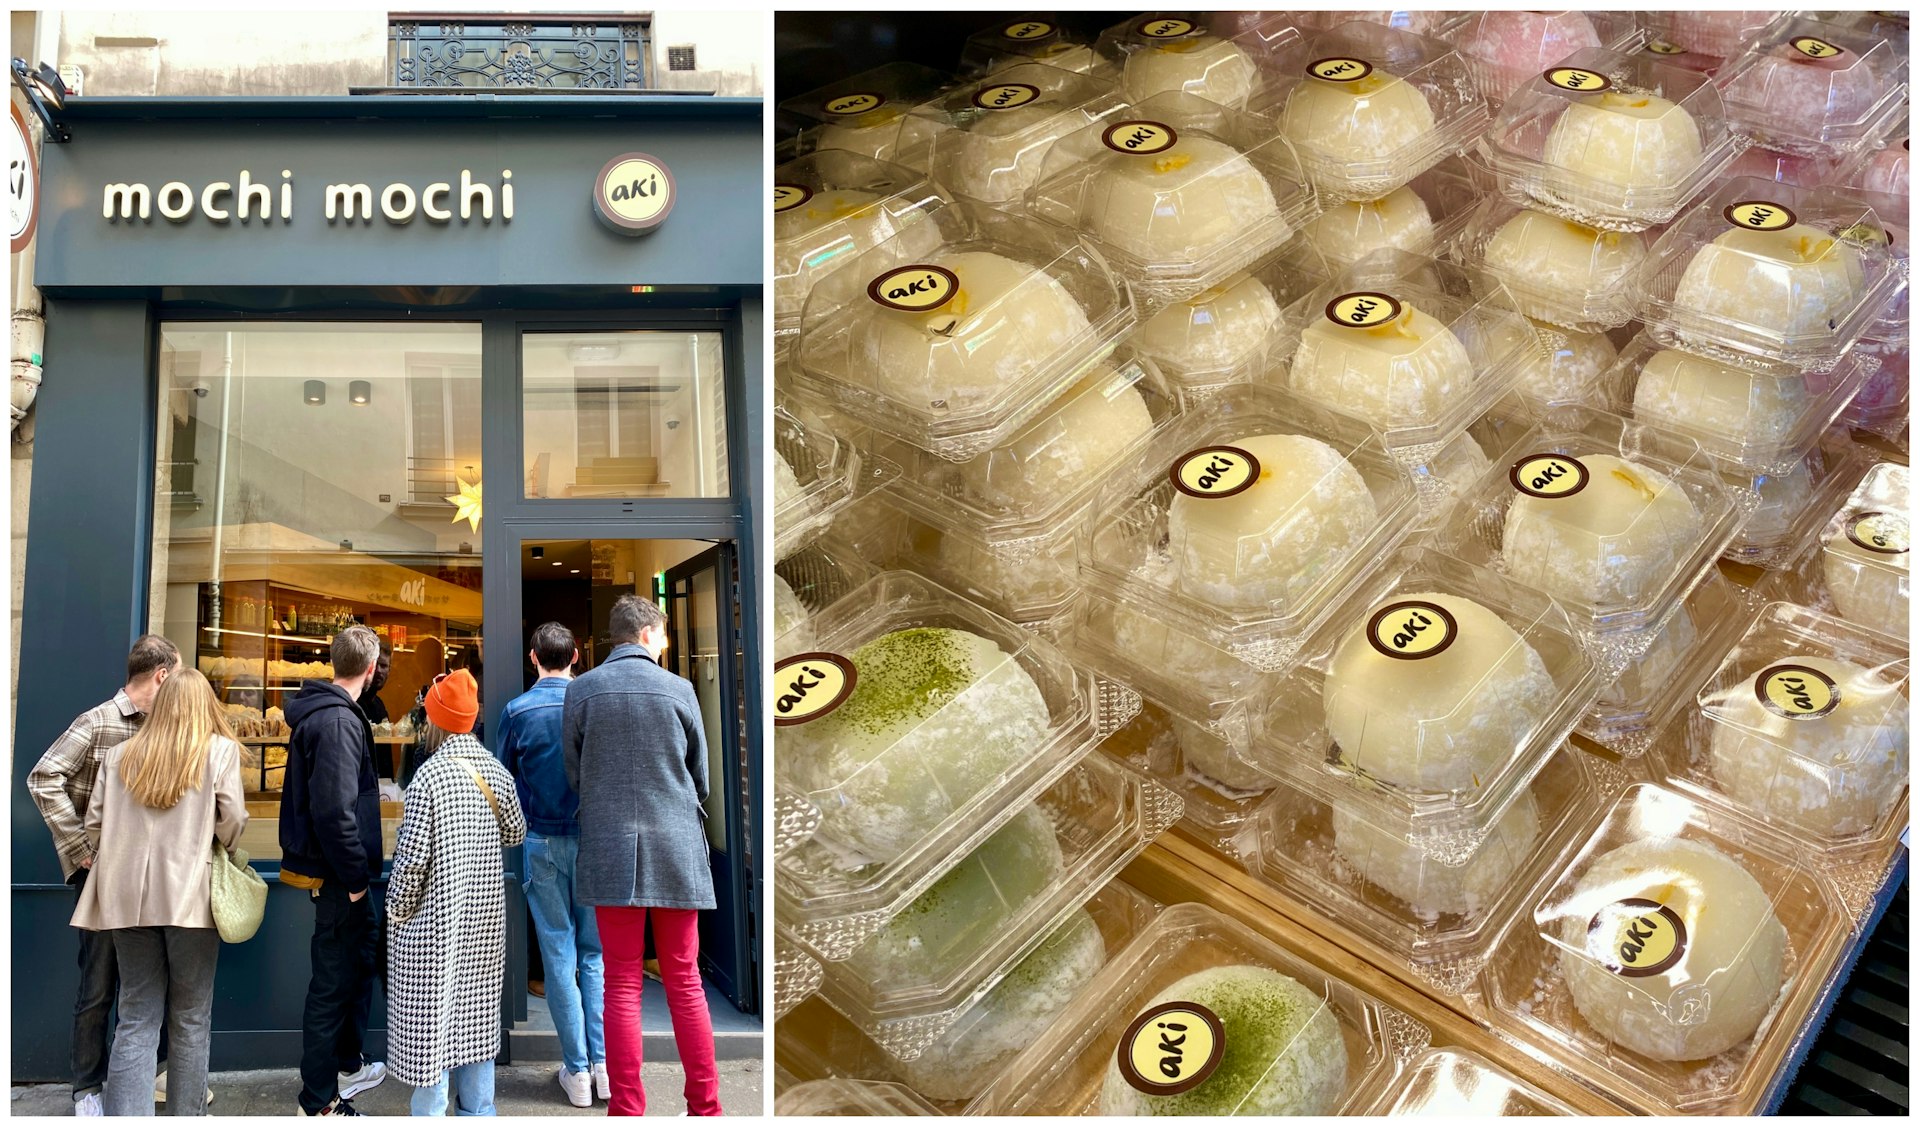 L: Queue outside Mochi Mochi in Paris. R: Close-up of mochi desserts boxed in plastic containers